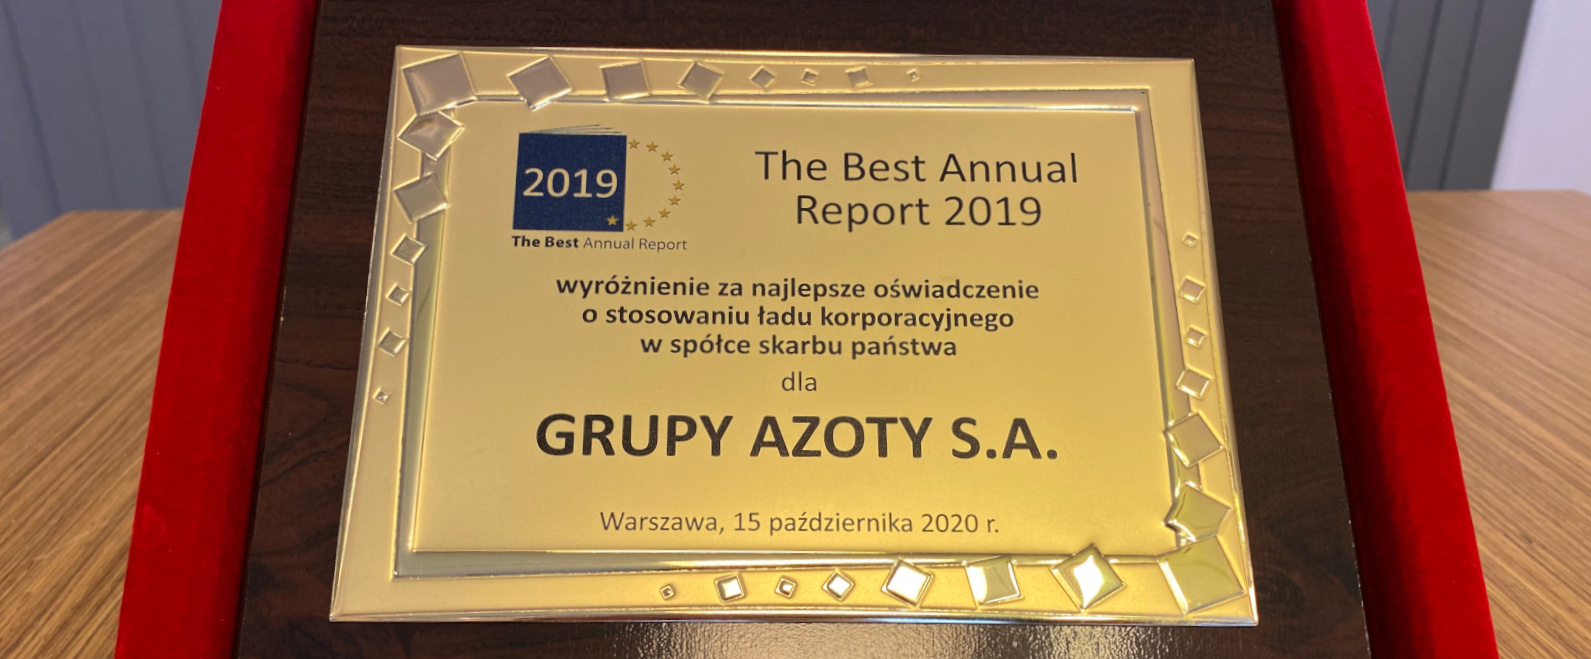 Grupa Azoty S.A. awarded in The Best Annual Report 2019 competition